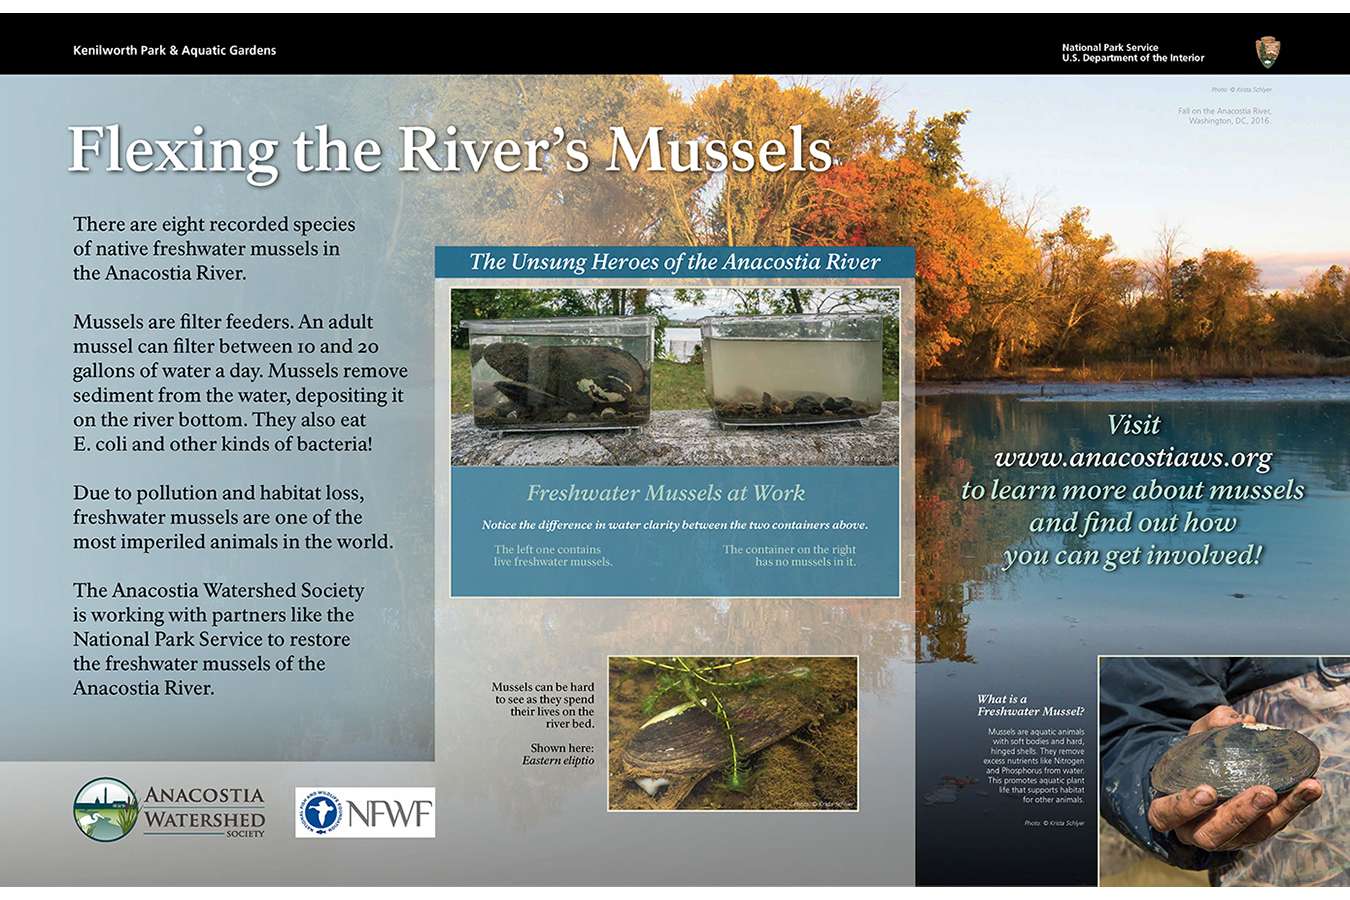 ANACOST WS 1 : Anacostia Watershed Society grows mussels in the Anacostia river to improve water quality